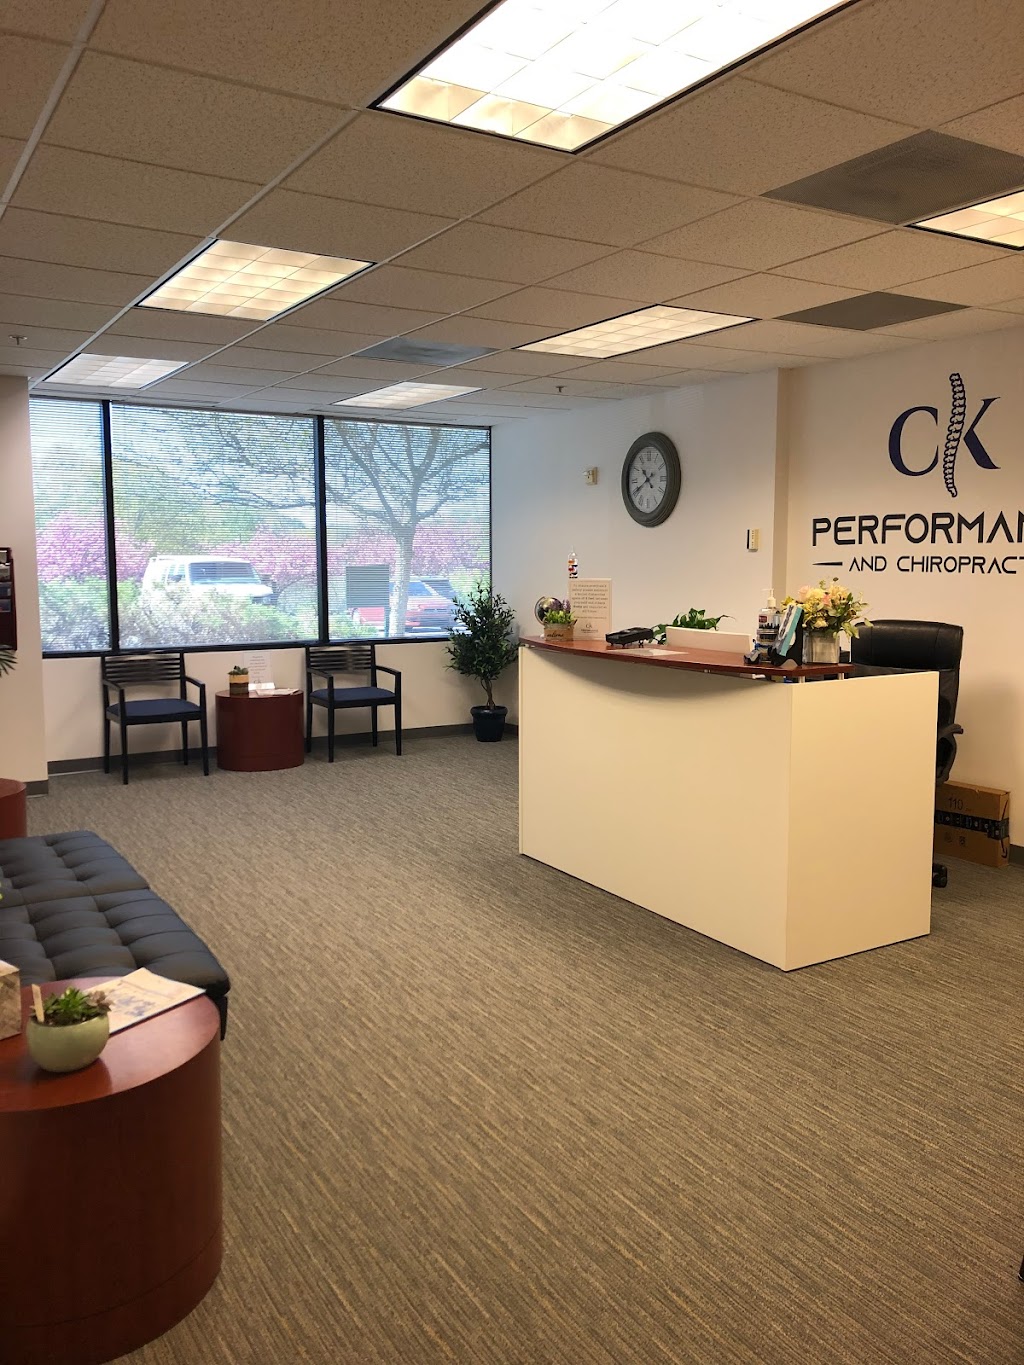 CK Performance and Chiropractic | 100 Beard Sawmill Rd Suite 115, Shelton, CT 06484 | Phone: (203) 951-9115